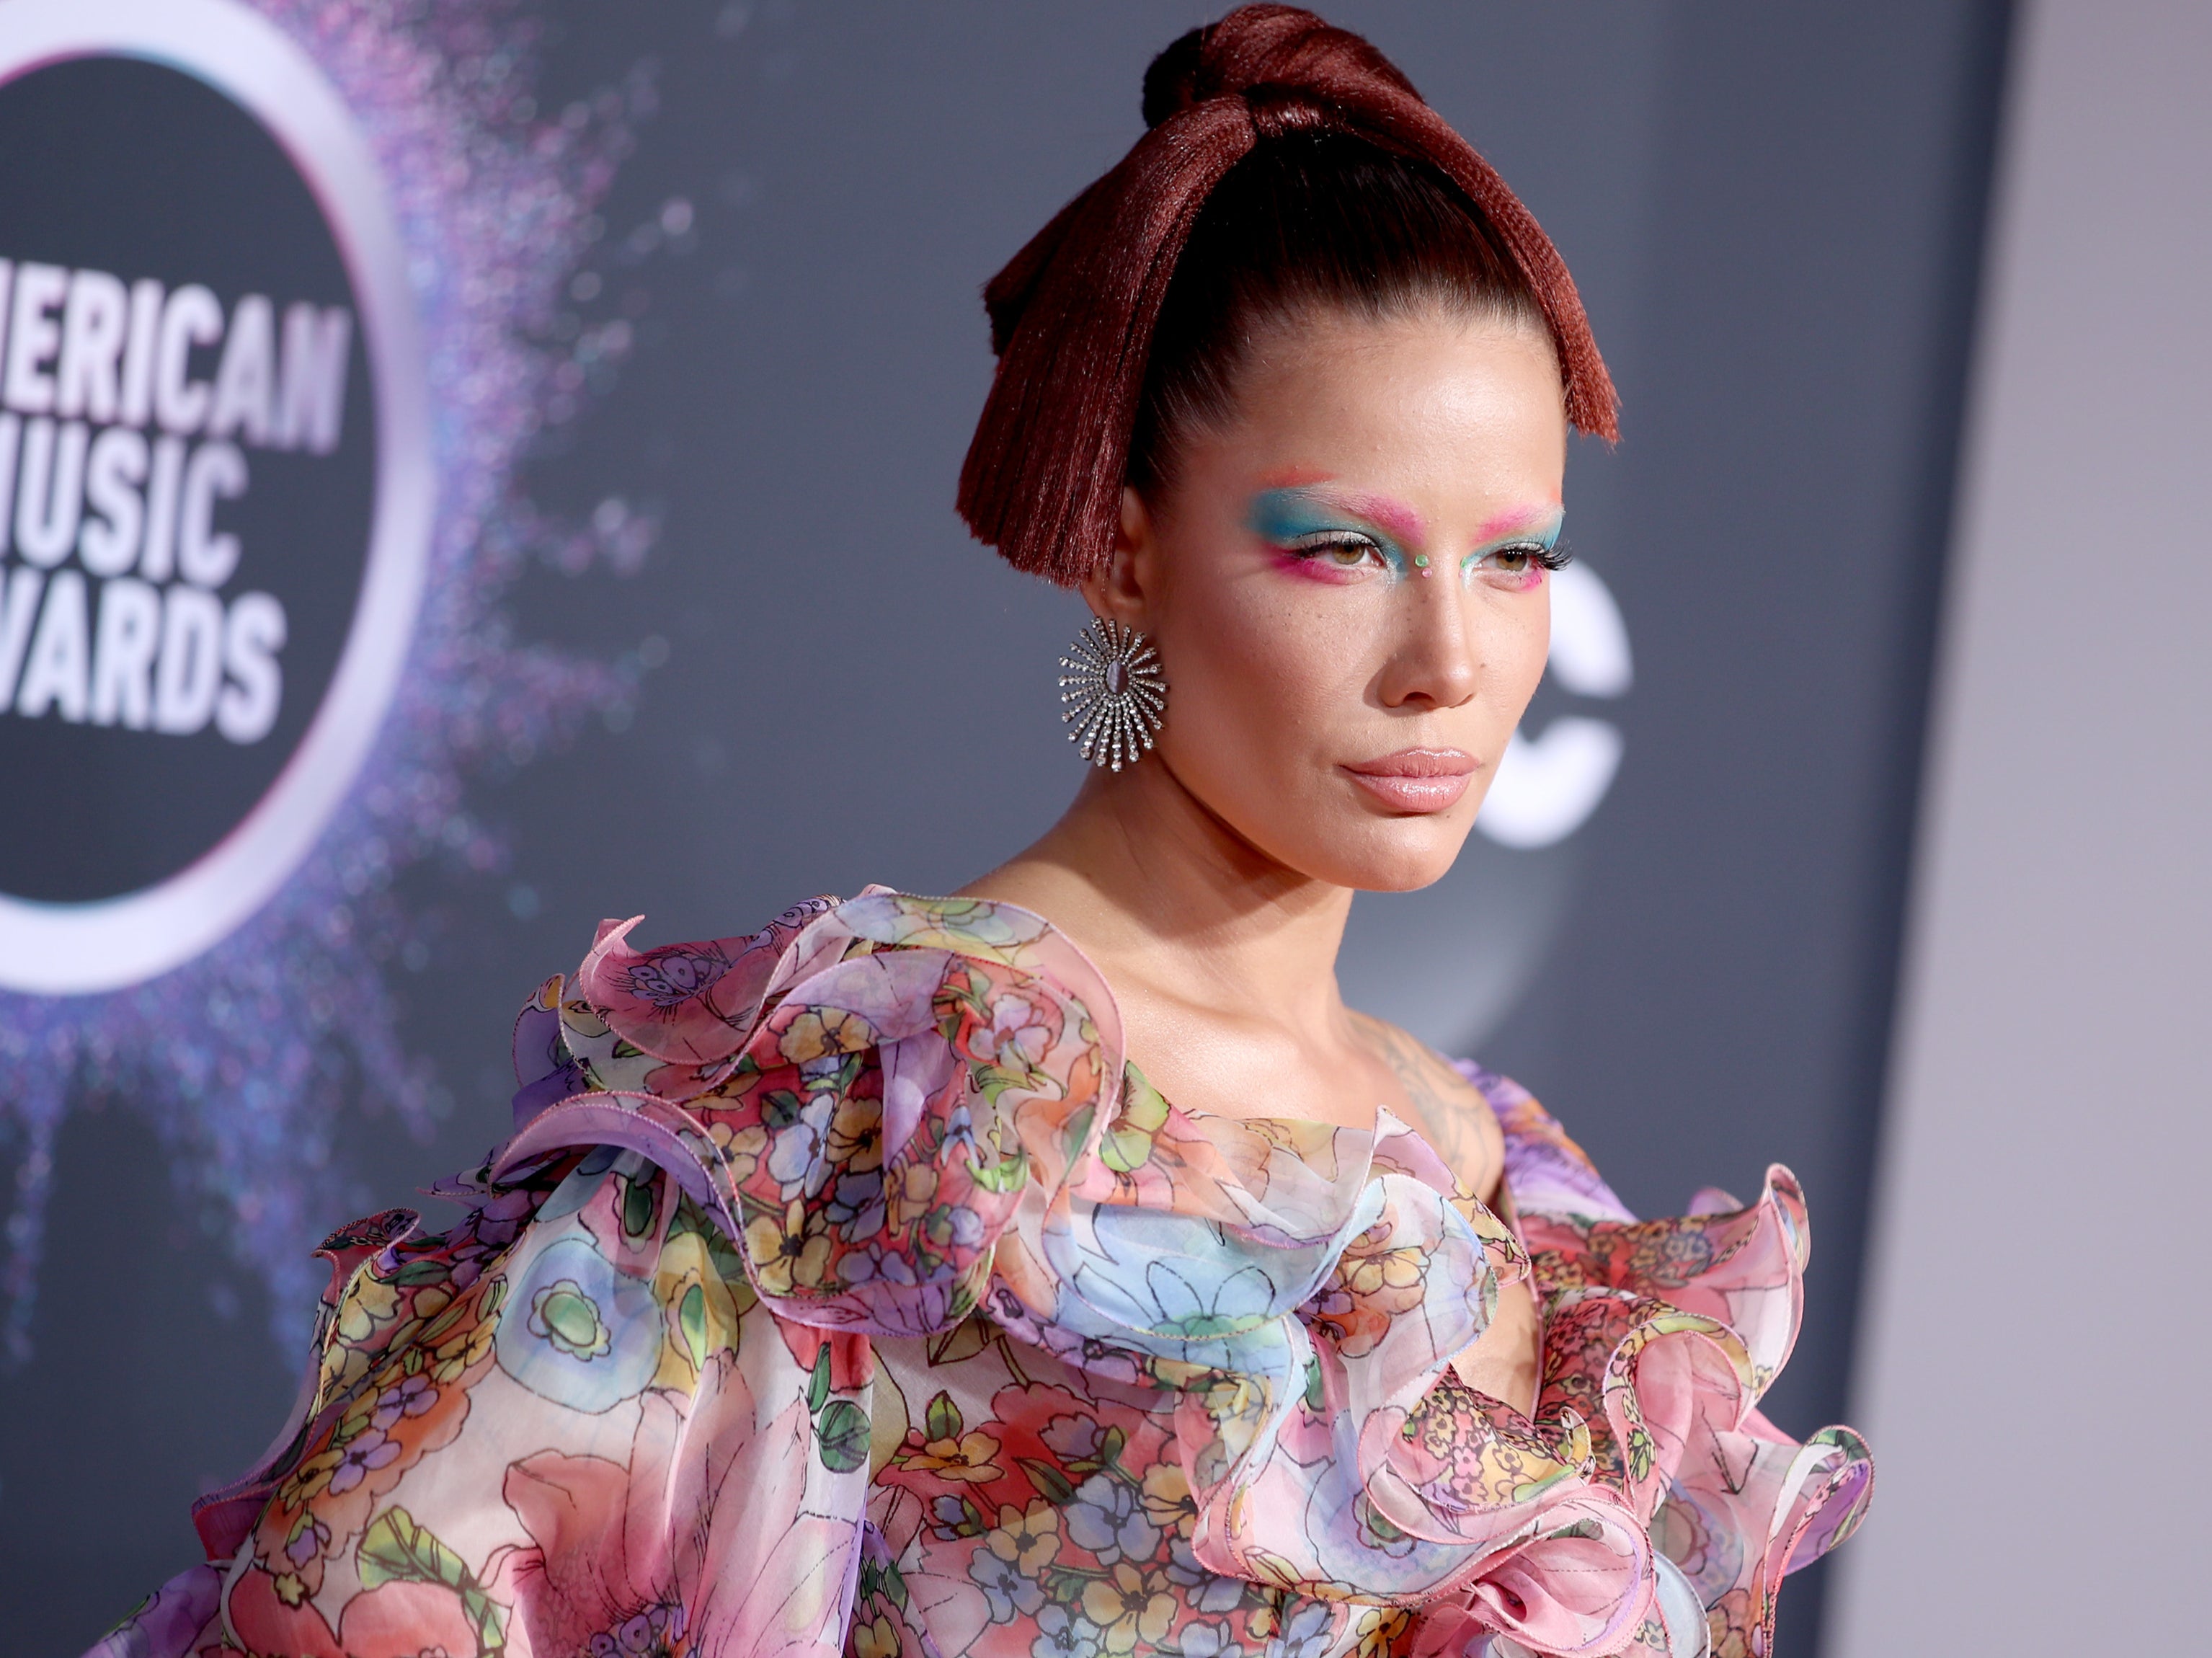 Halsey attends the 2019 American Music Awards at Microsoft Theater on November 24, 2019 in Los Angeles, California